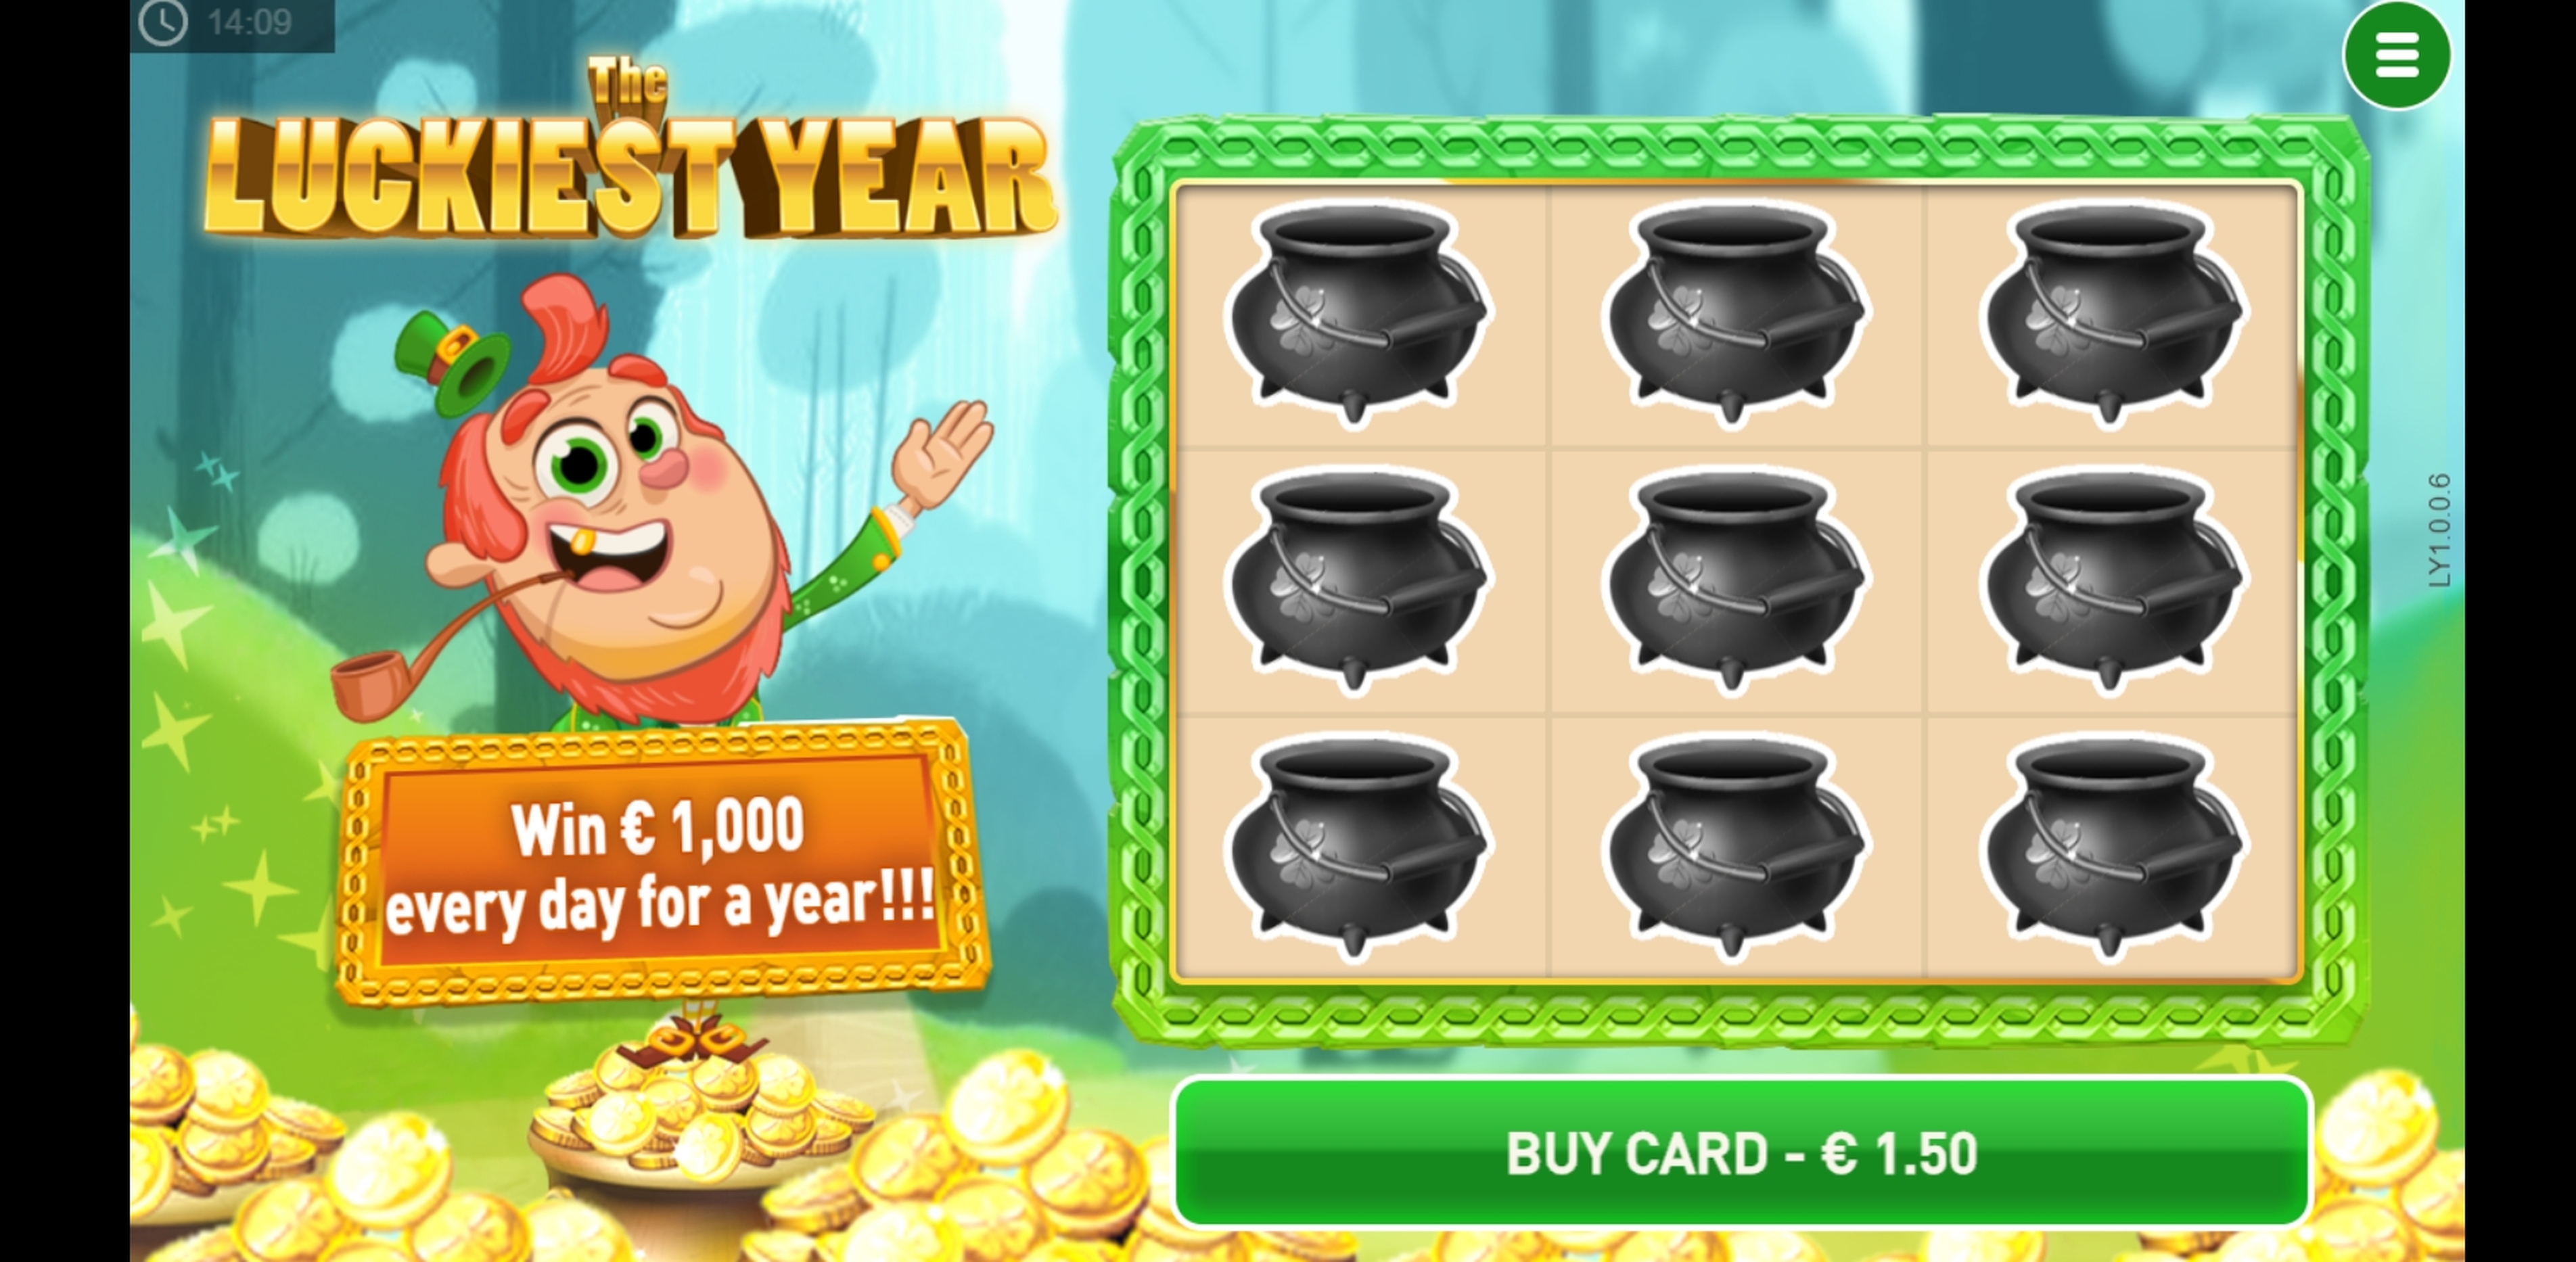 Reels in The Luckiest Year Scratch Slot Game by PariPlay